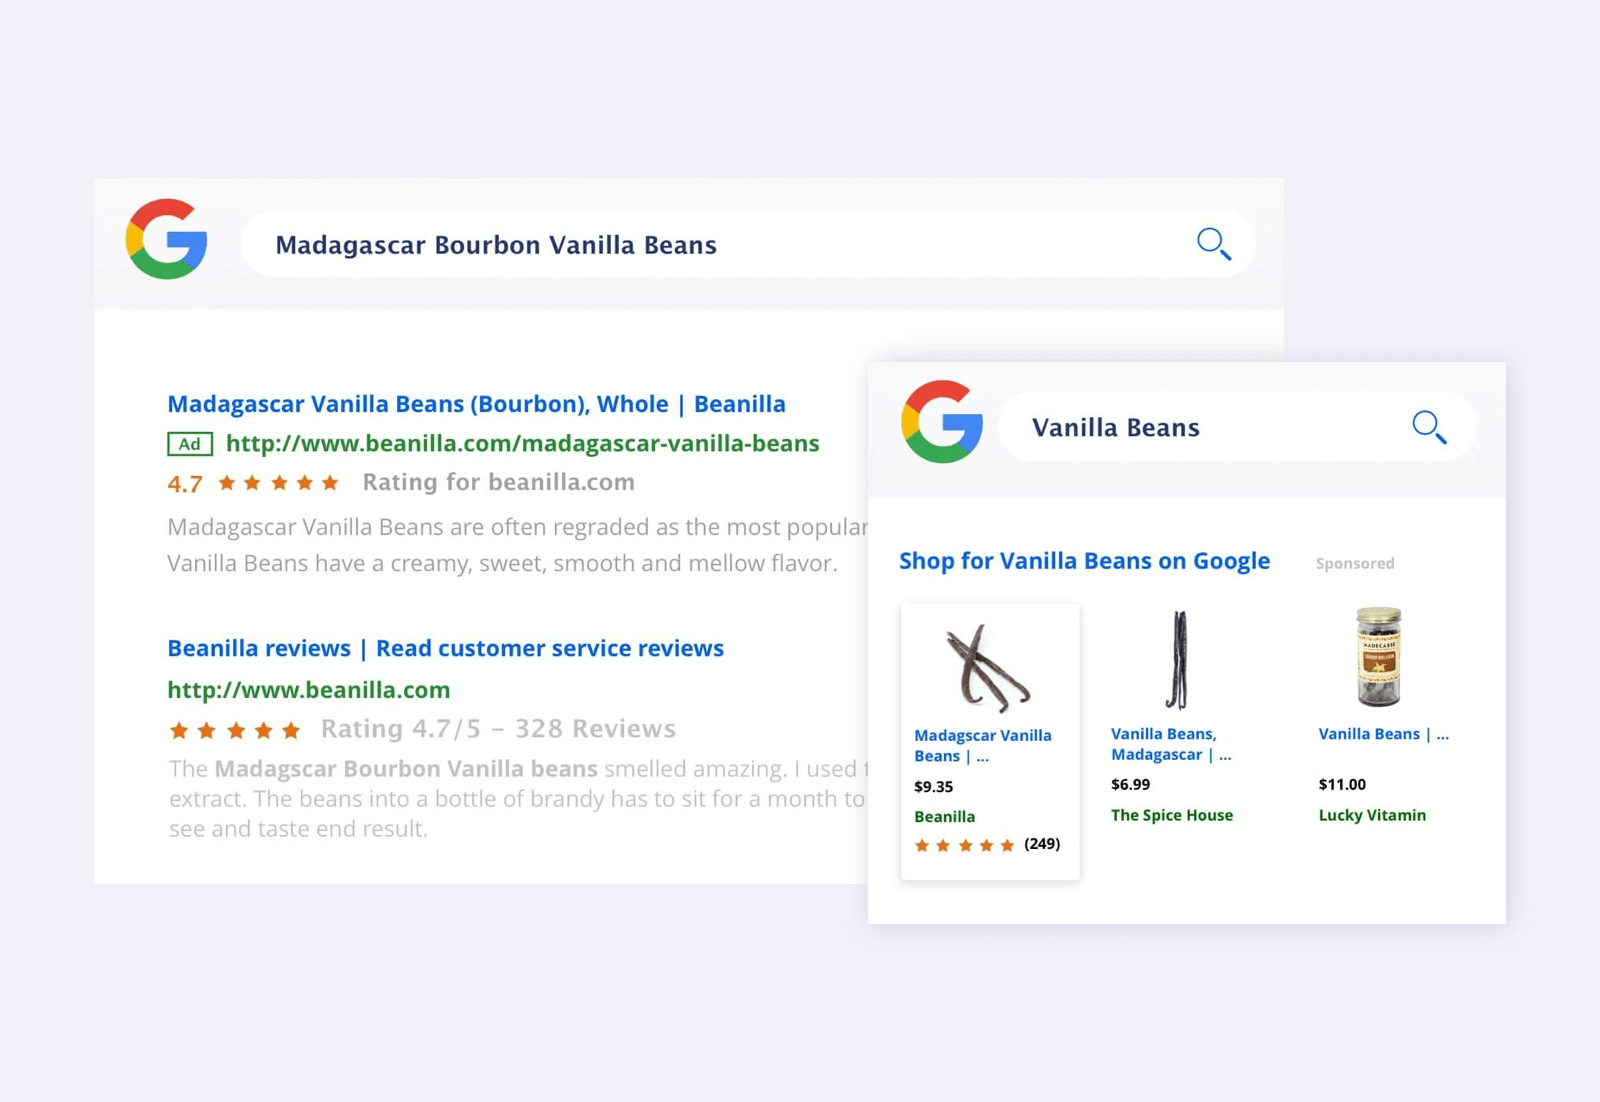 Beanilla gains visibility on Google because of reviews